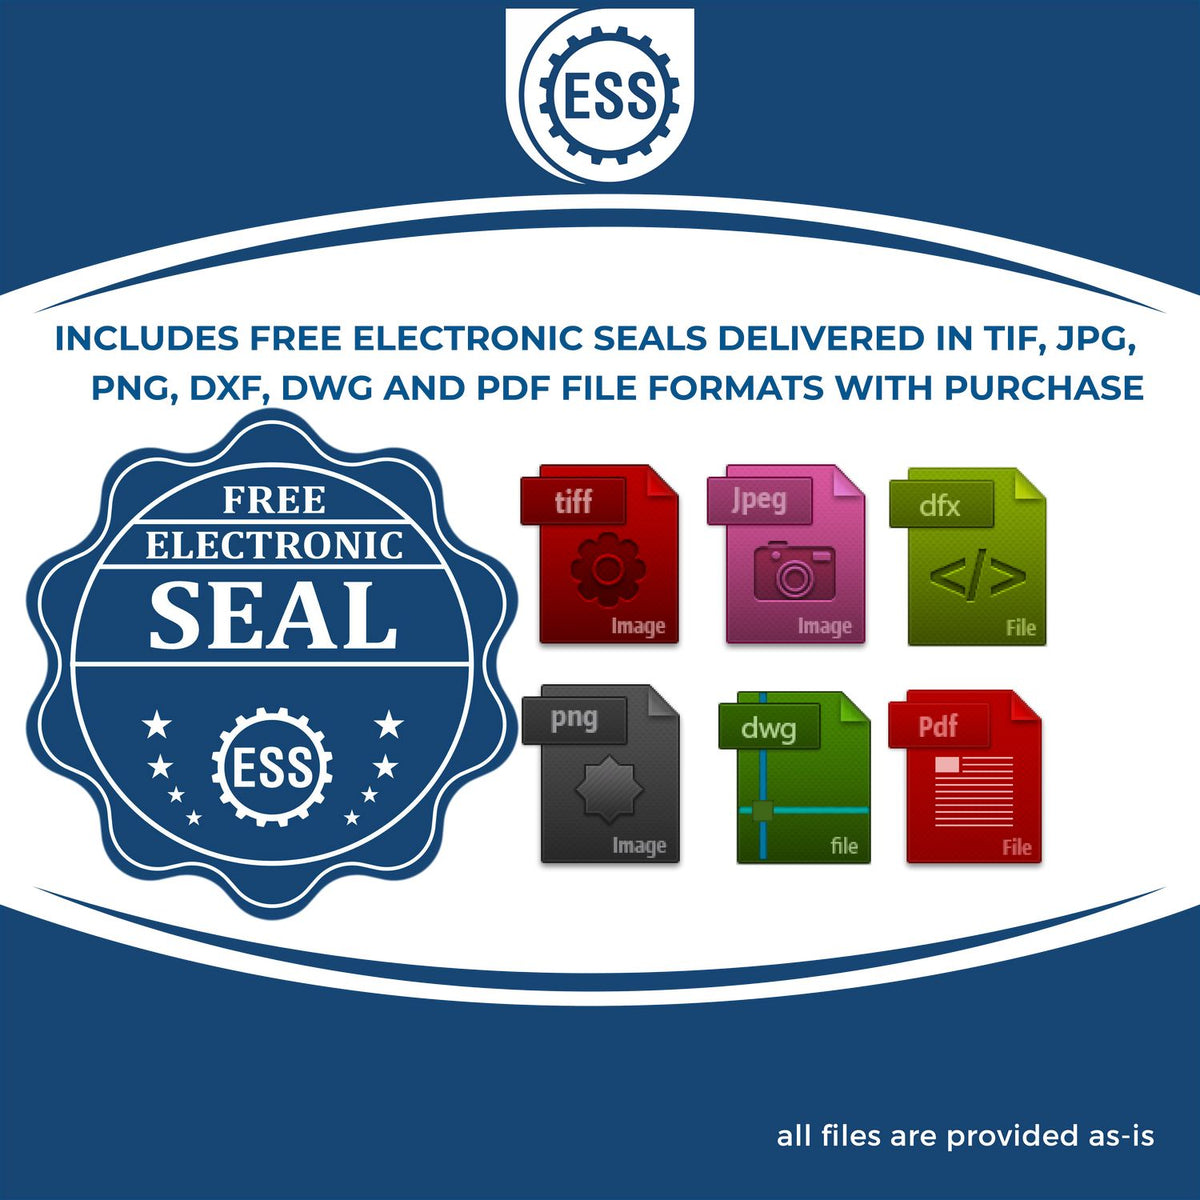 An infographic for the free electronic seal for the Heavy Duty Cast Iron Tennessee Engineer Seal Embosser illustrating the different file type icons such as DXF, DWG, TIF, JPG and PNG.